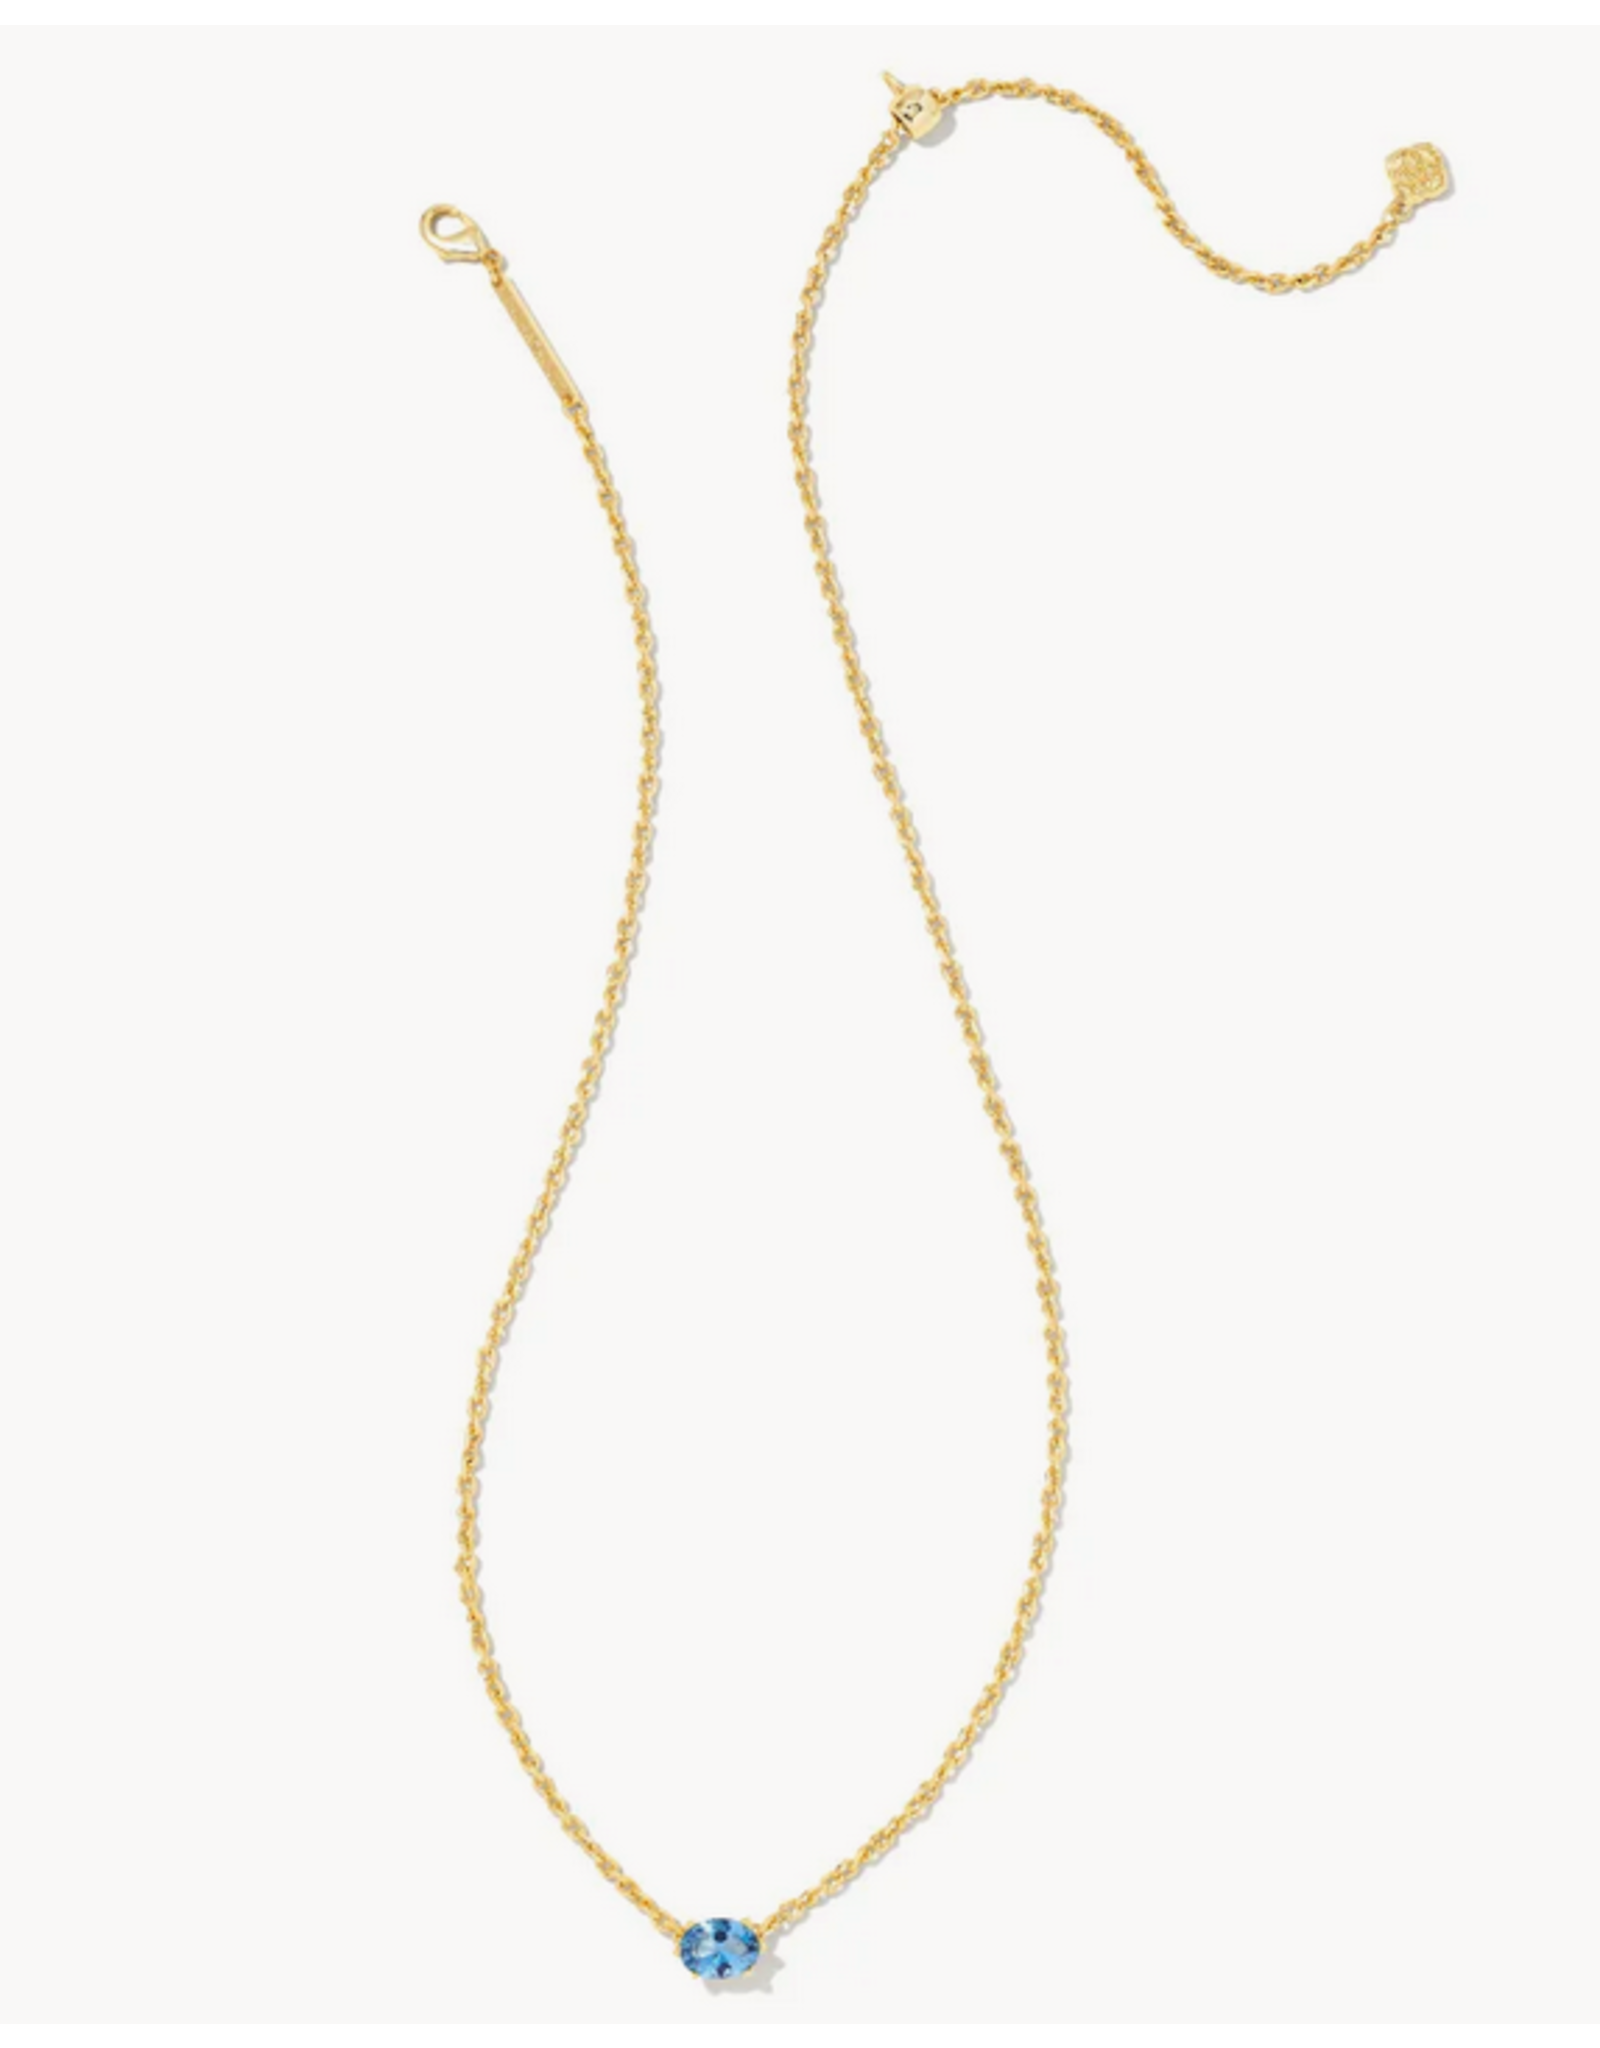 Kendra Scott 14k Gold-Plated Mixed Bead & Multicolor Cord Choker Necklace,  15